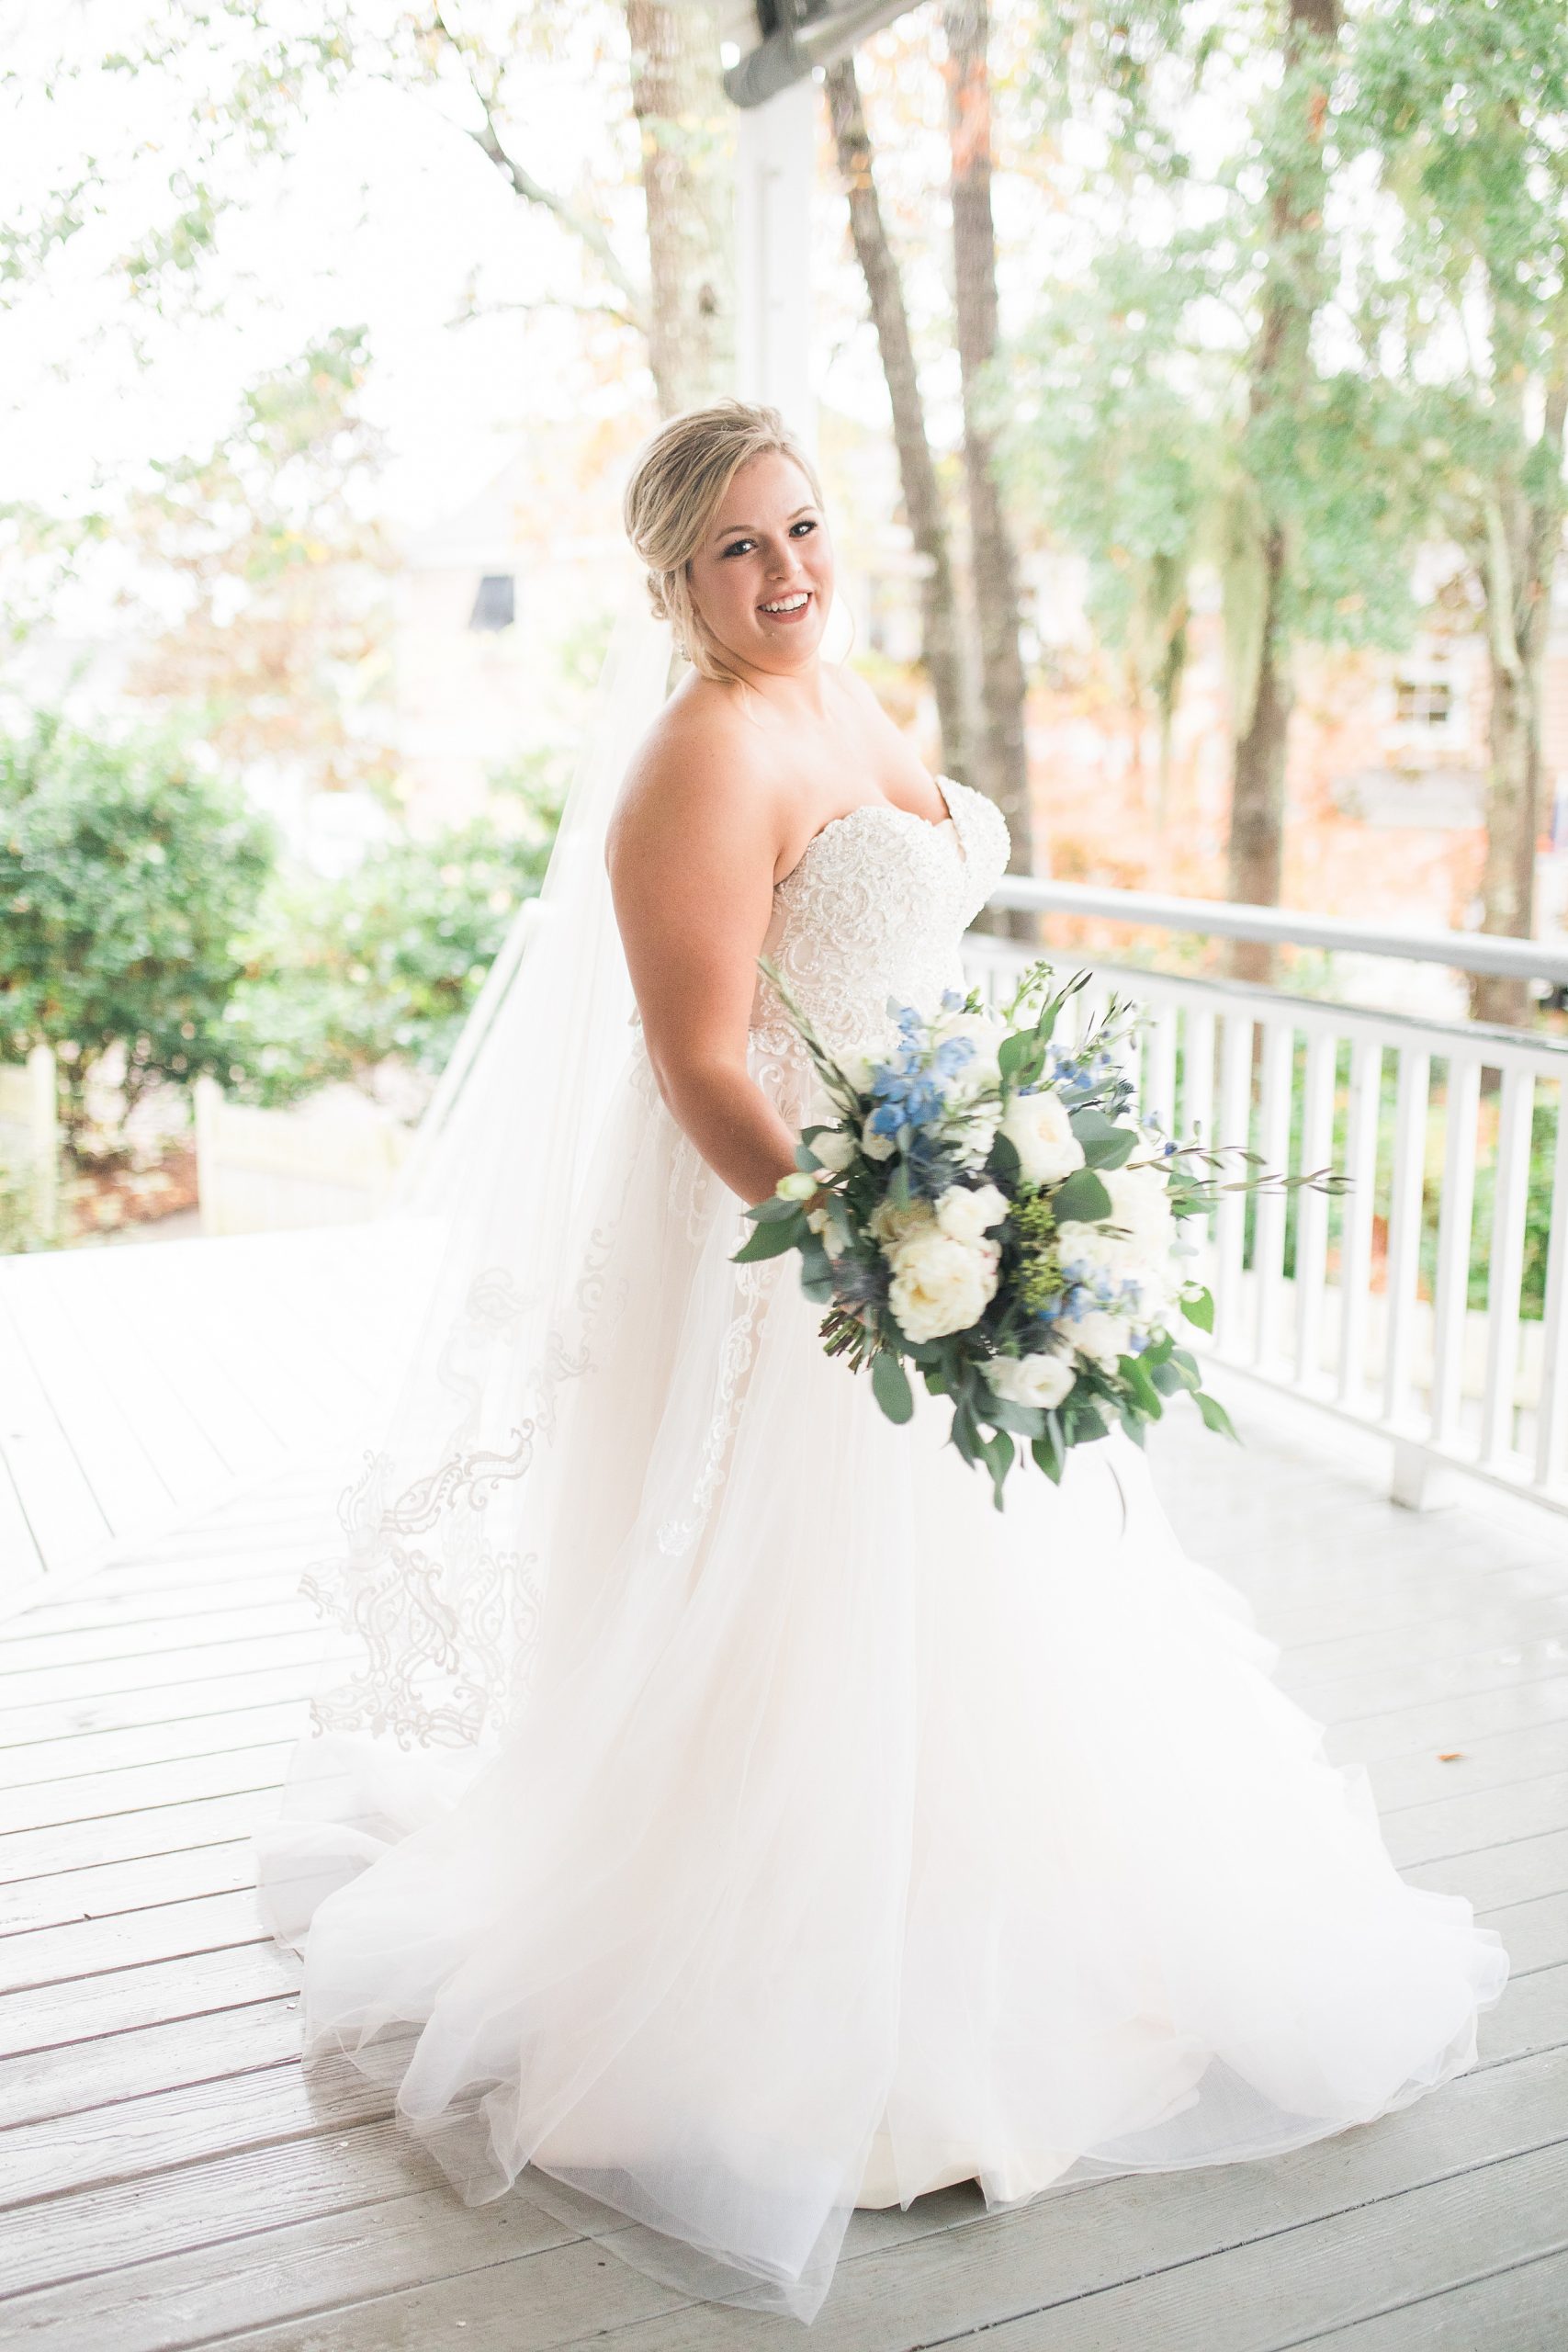 Bride holding flowers on porch